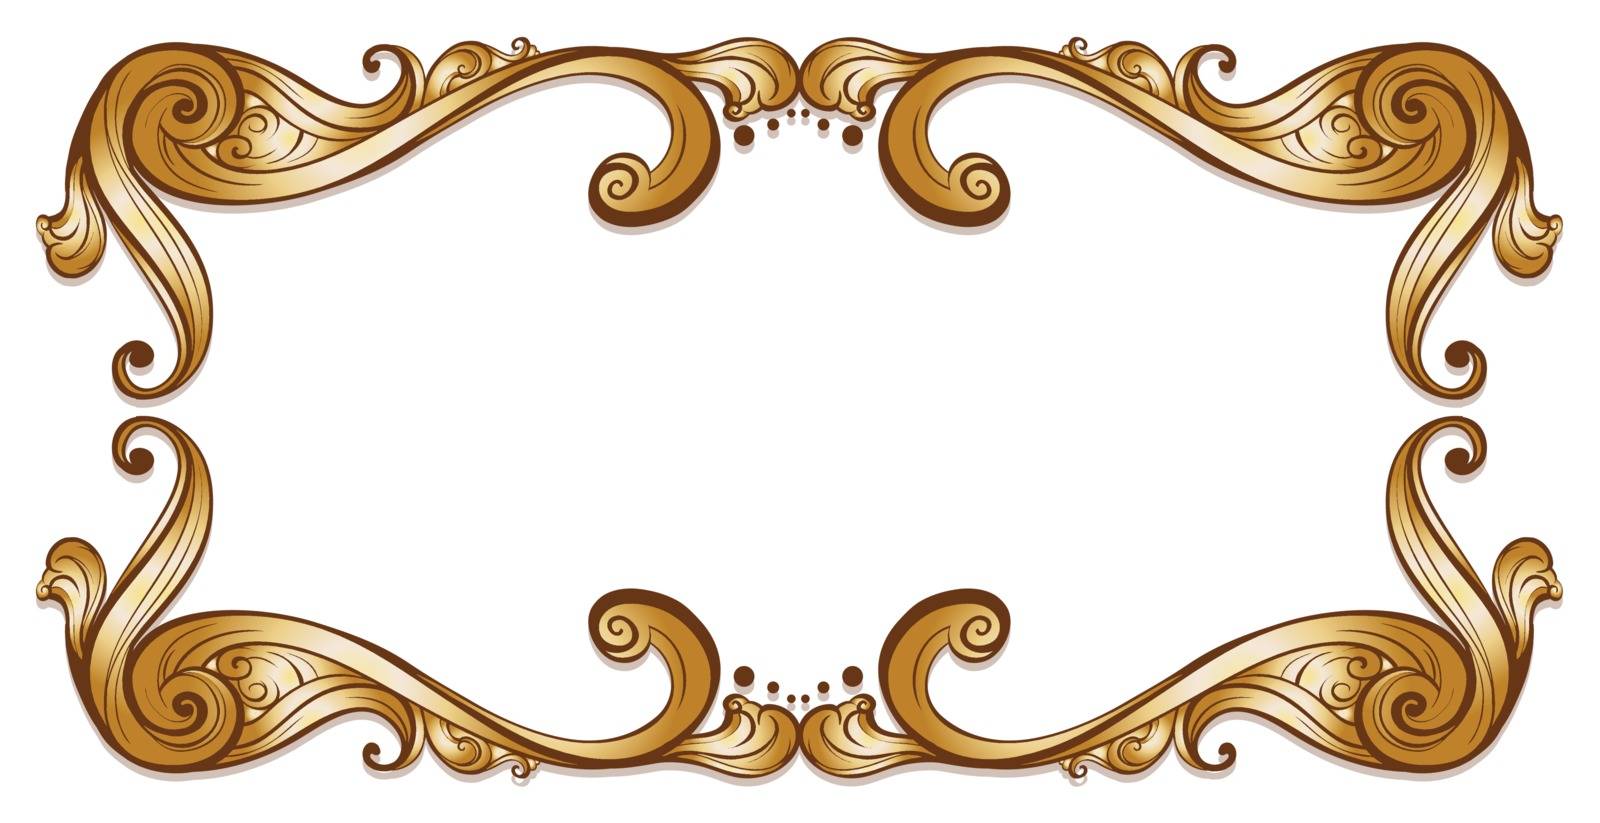 Illustration of a bold brown border on a white background